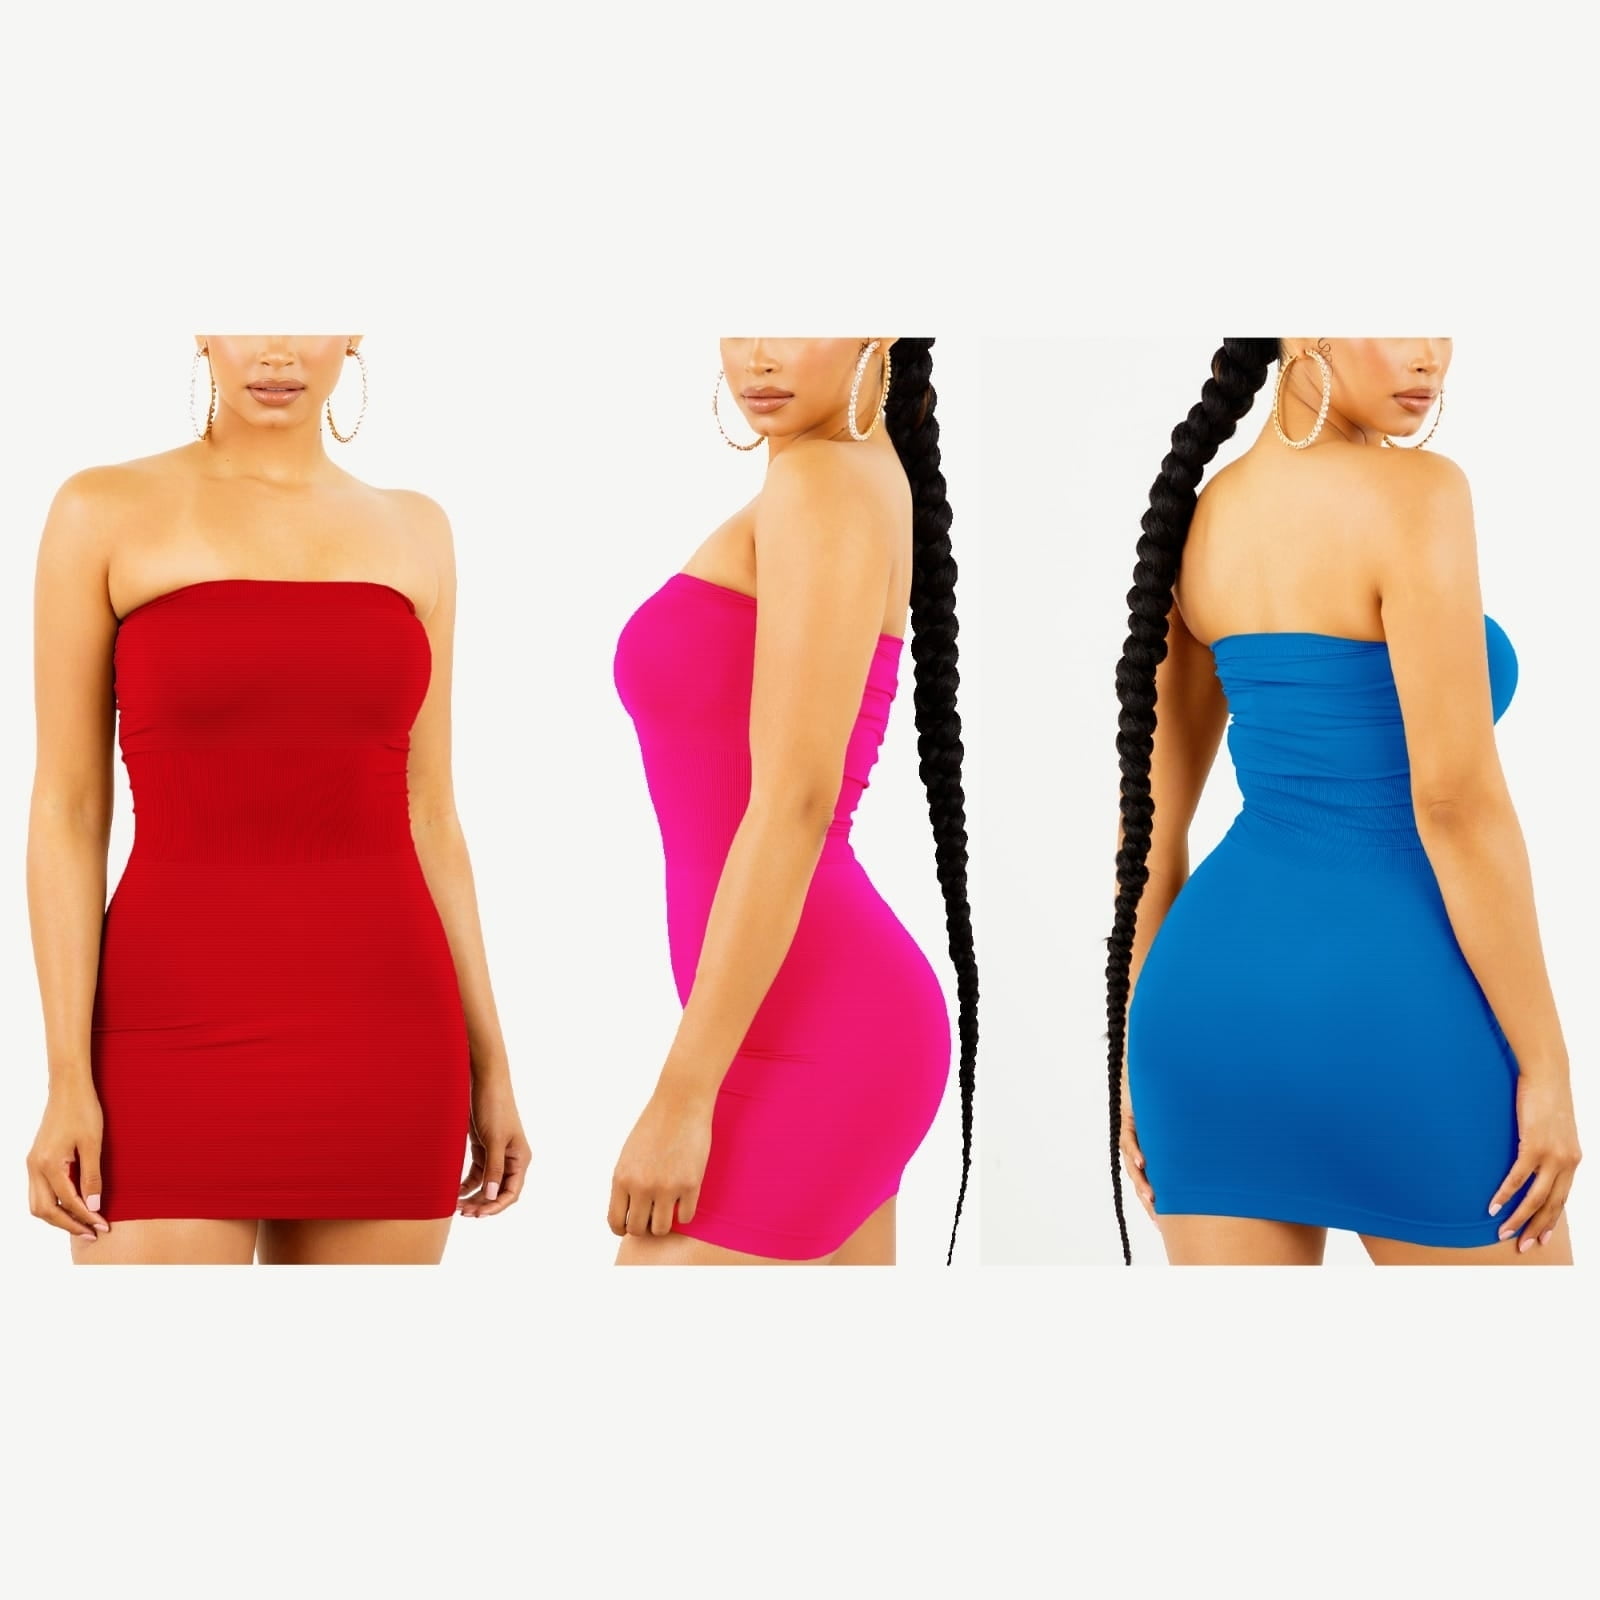 What are some party dresses for different body types? | by Fouad Sarkis |  Medium